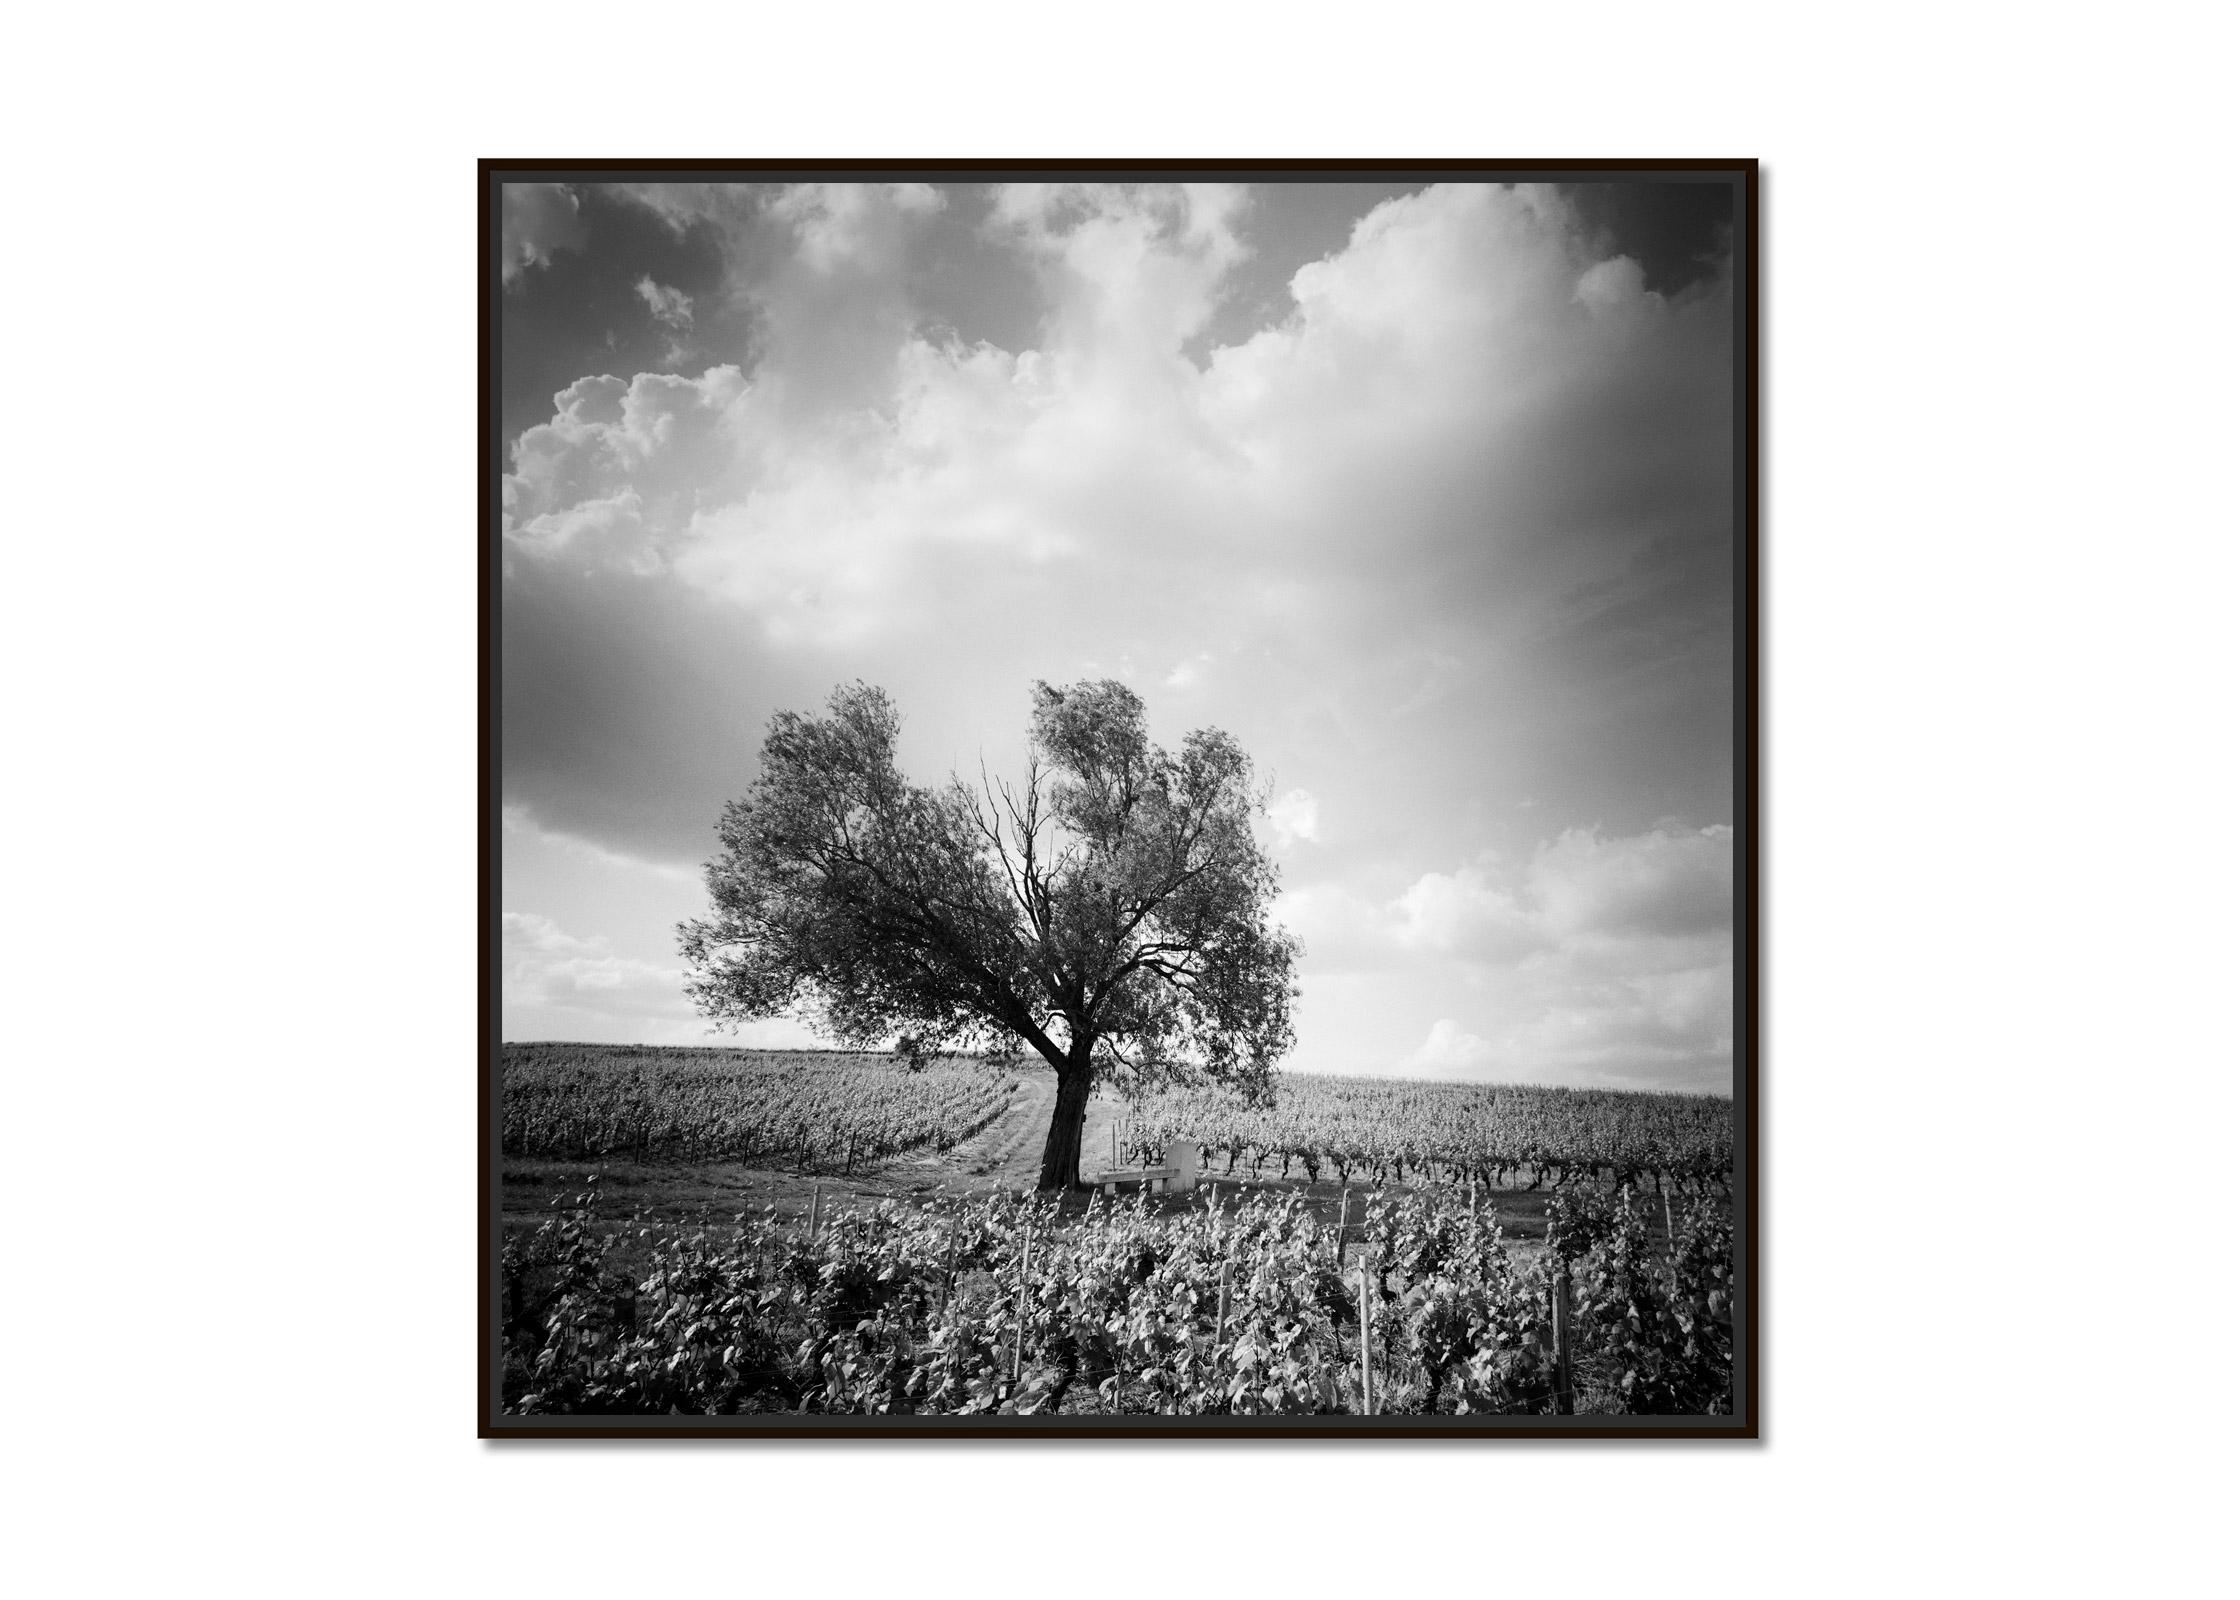 Old Tree at Vineyard, Bordeaux, France, black and white landscape photography - Photograph by Gerald Berghammer